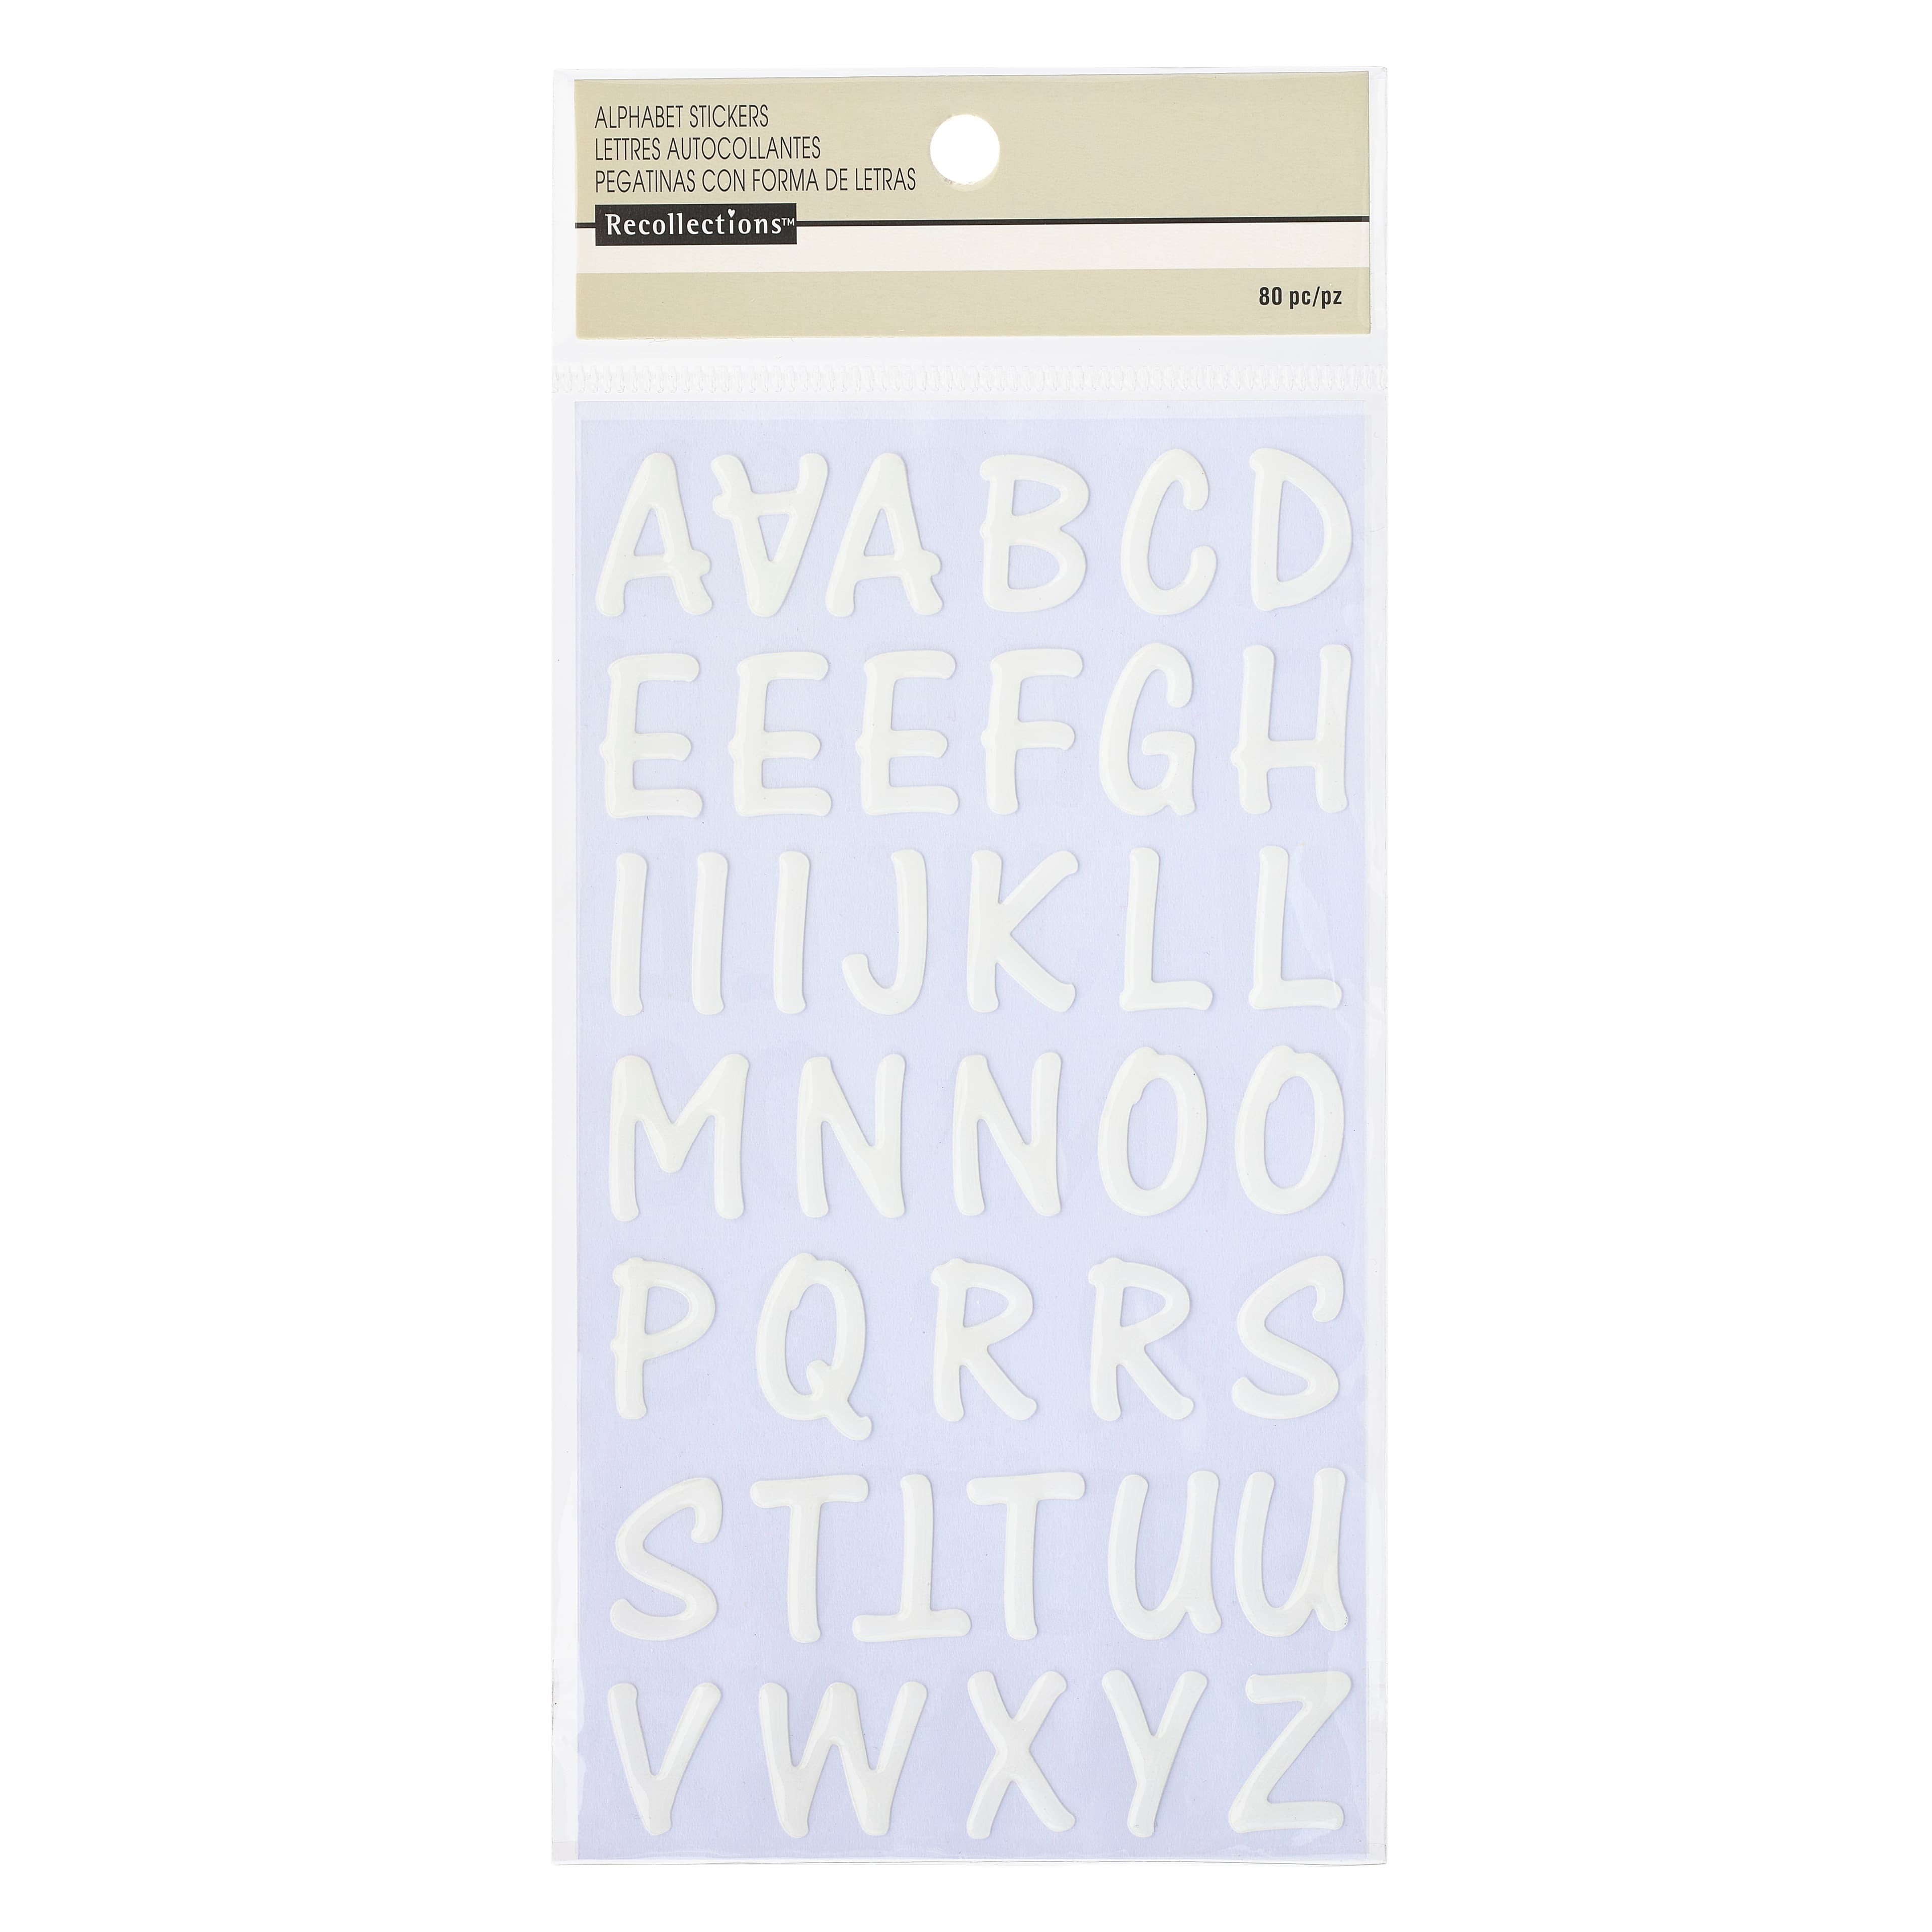 12 Packs: 80 ct. (960 total) White Epoxy Alphabet Stickers by